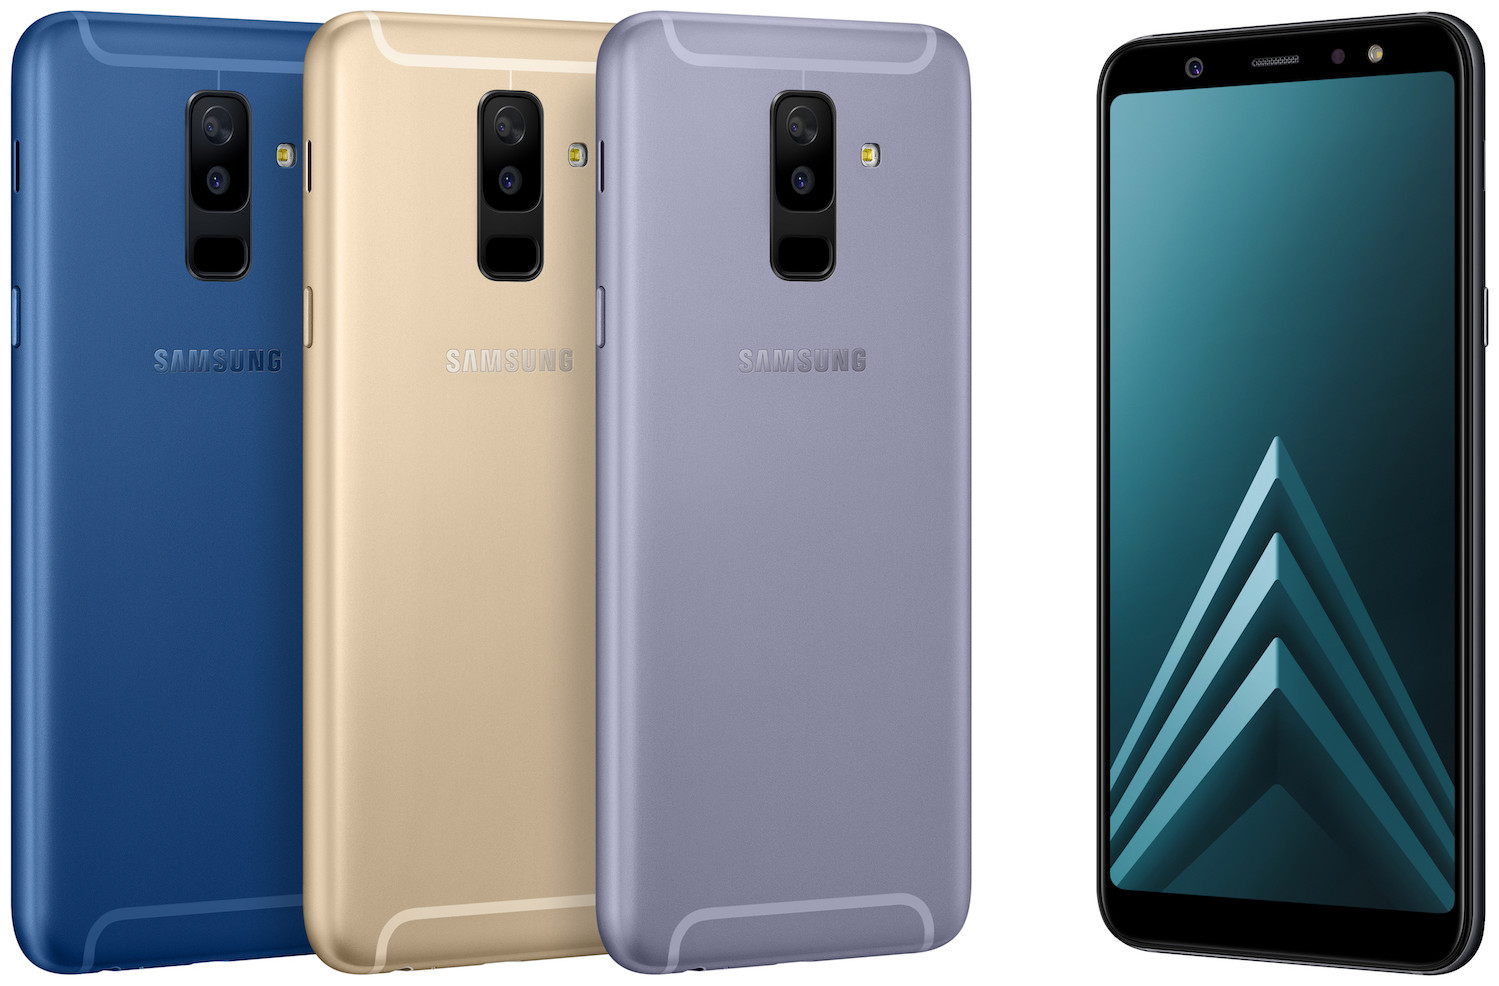 Samsung Galaxy A6+ (2018) 64GB - Specs and Price - Phonegg